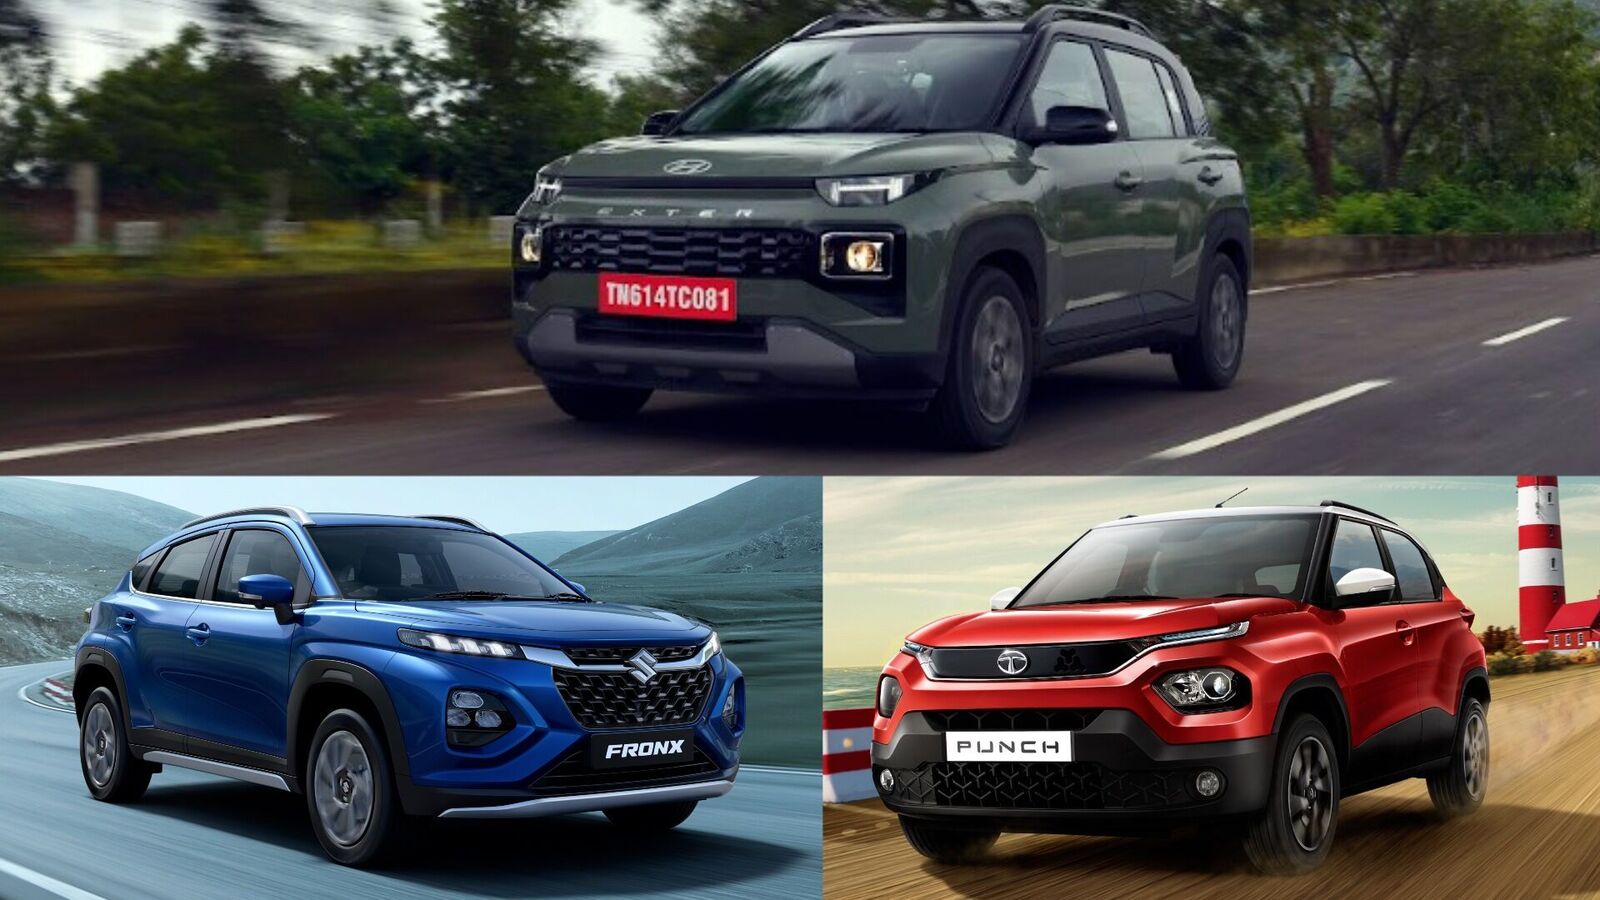 Hyundai Exter vs Tata Punch, Maruti Fronx: Which CNG SUV offers best mileage?